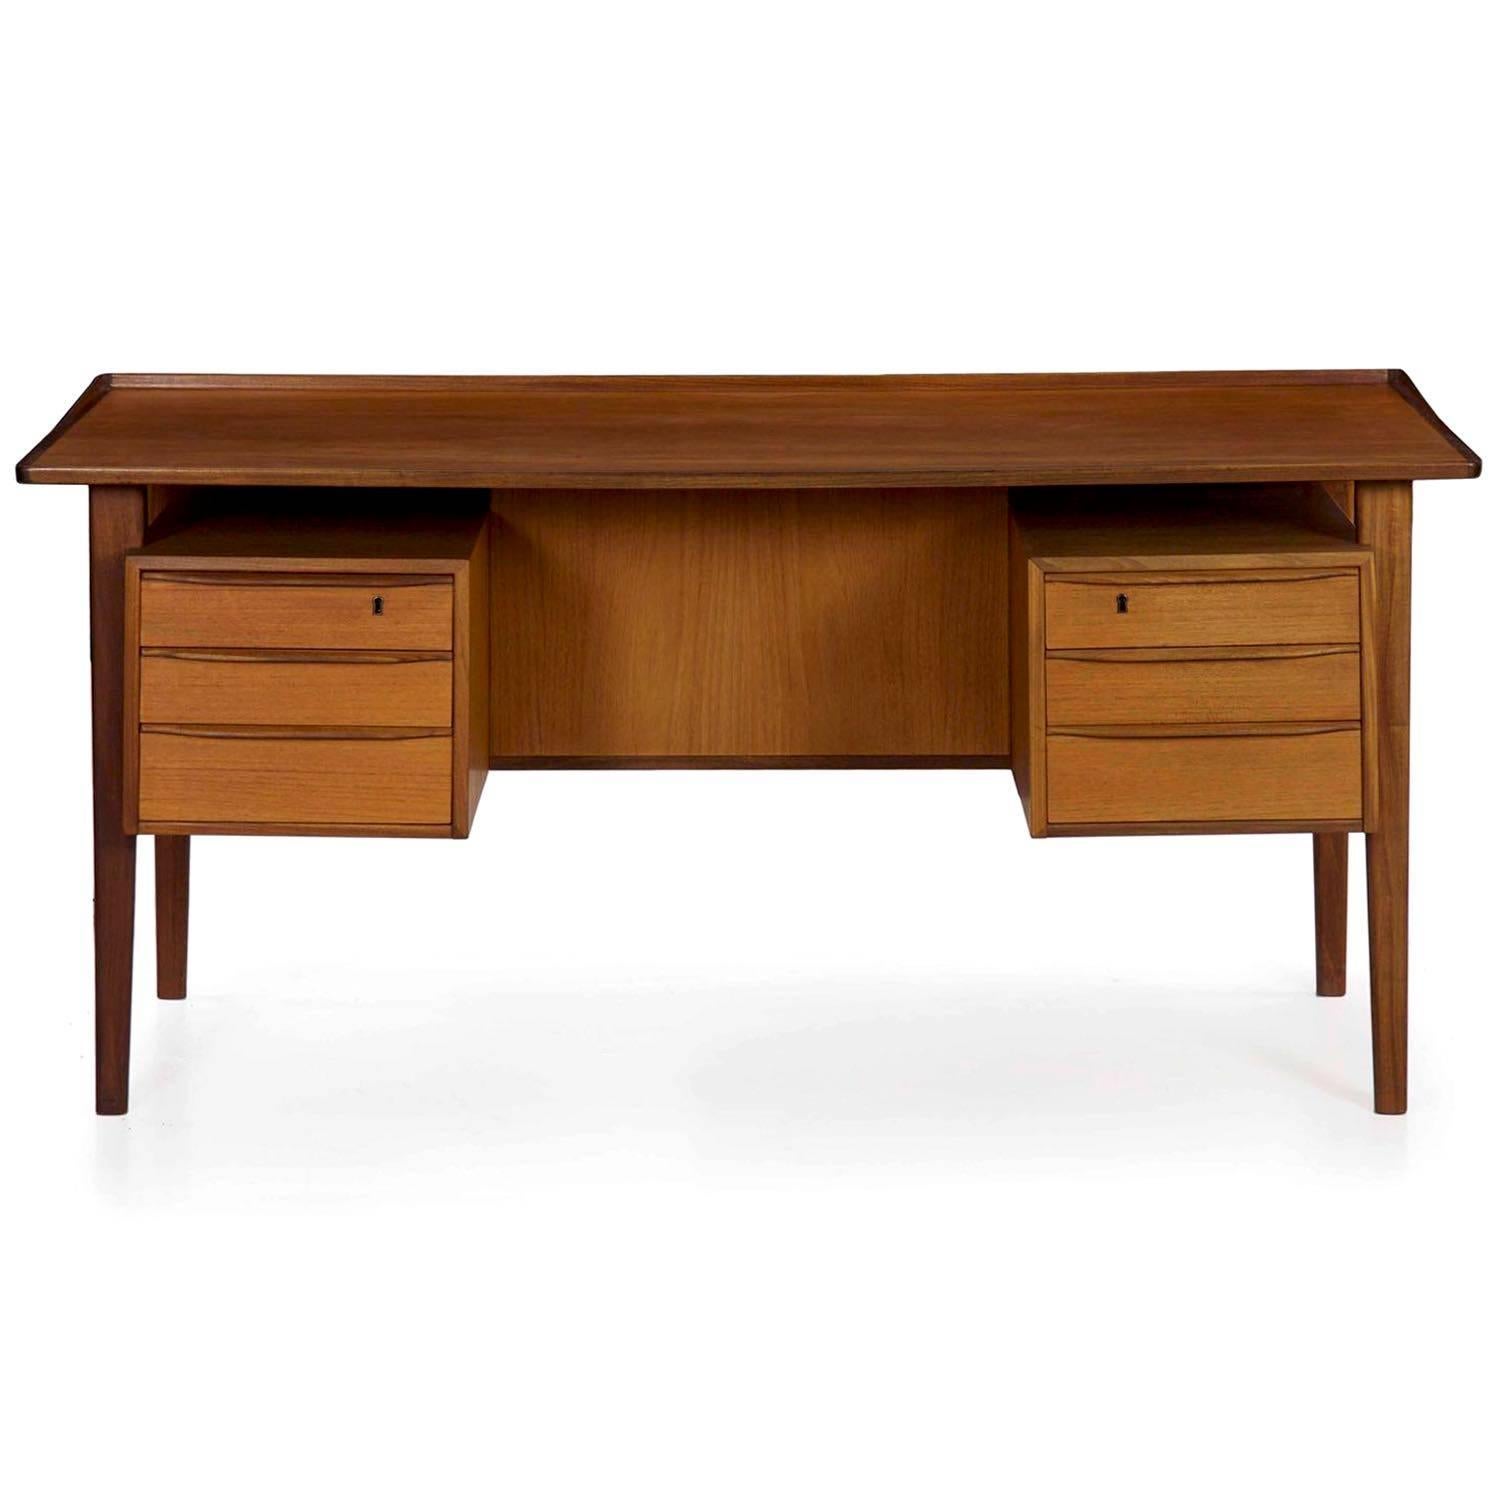 An exceptional sculpted teak desk by Peter Løvig Nielsen for Dansk Design of Denmark, it is notable for the sculpted floating writing top with its faceted upraised edging. The facets are followed through in the rest of the desk design, allowing the